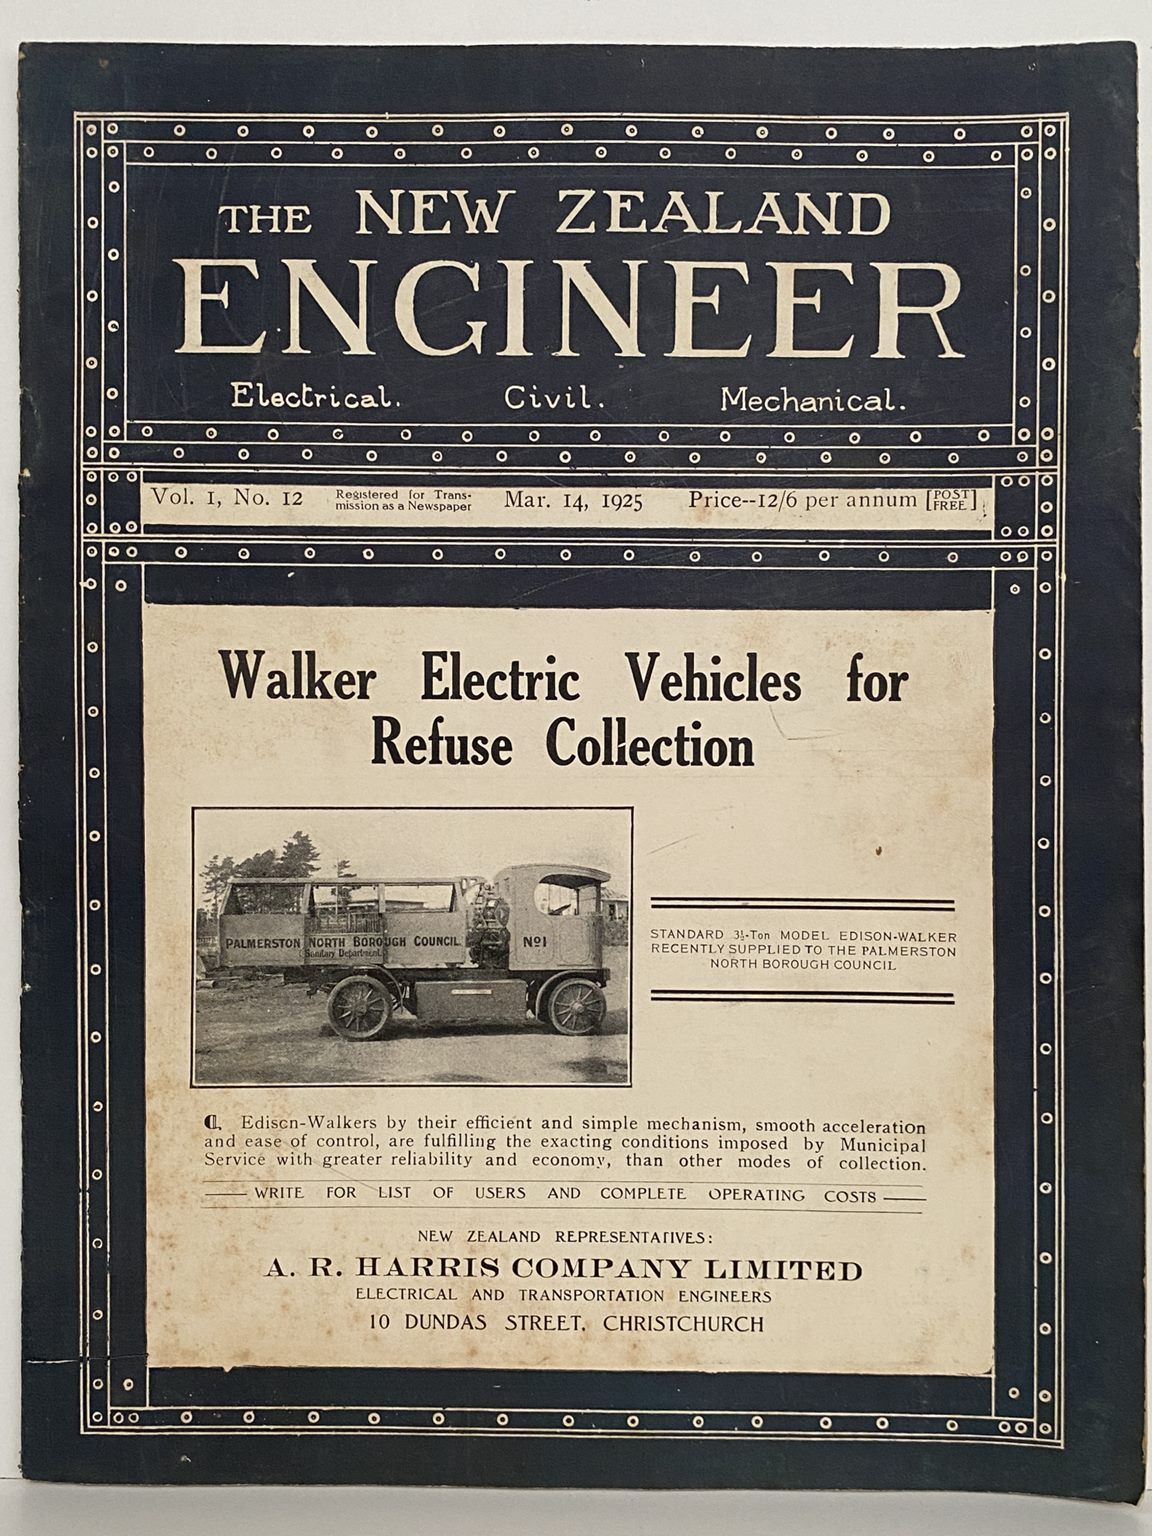 OLD MAGAZINE: The New Zealand Engineer Vol. 1, No. 12 - 15 March 1925